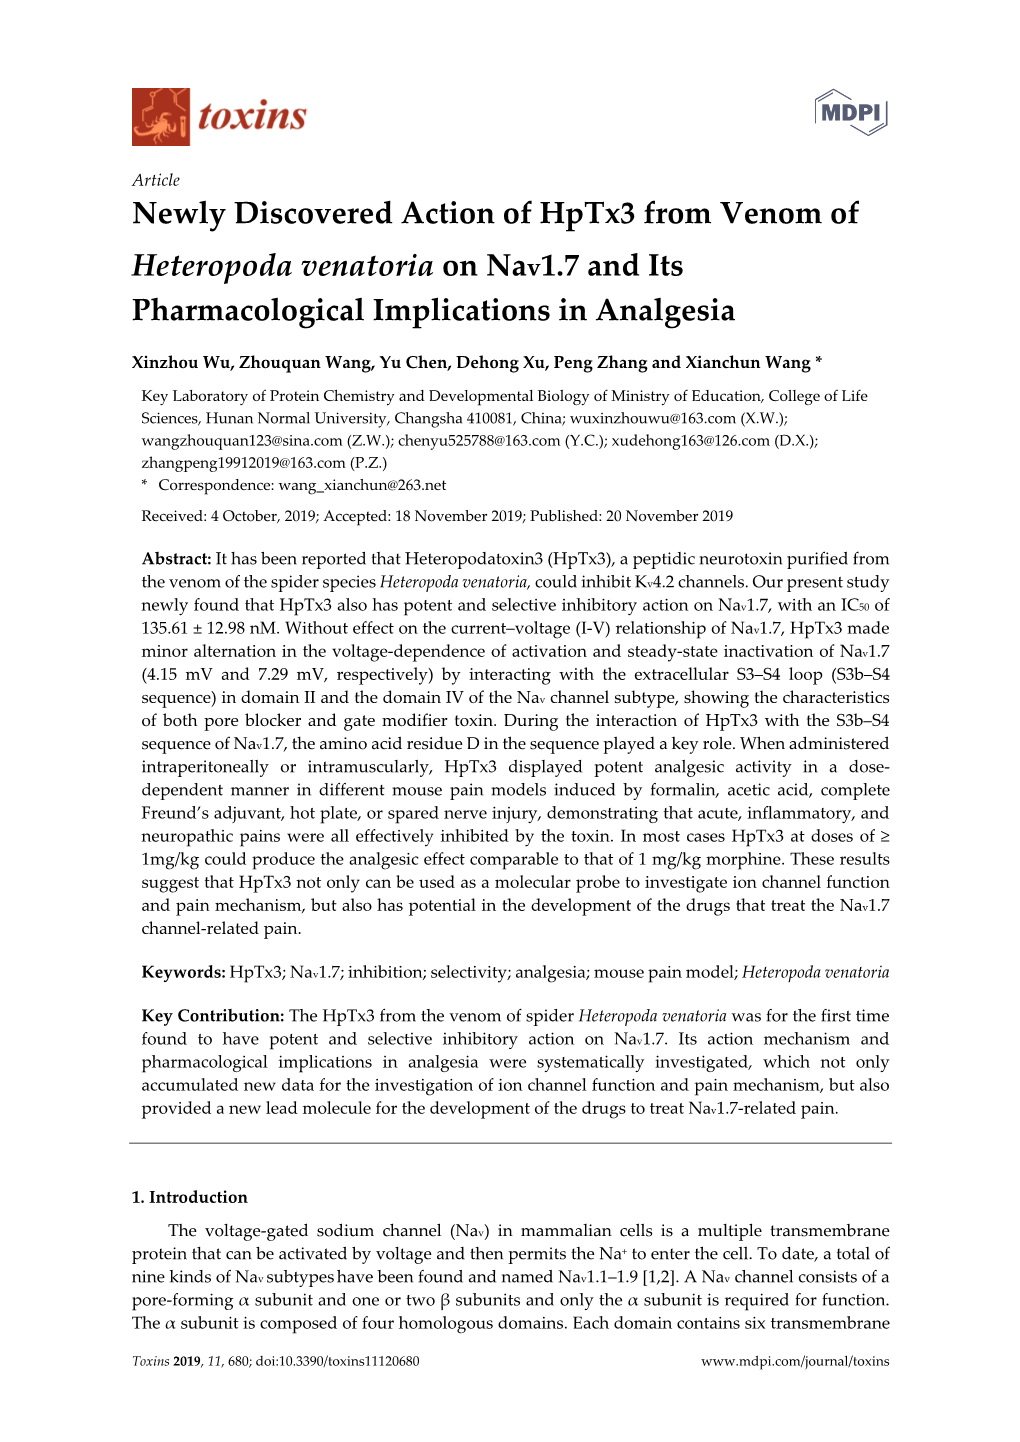 Newly Discovered Action of Hptx3 from Venom of Heteropoda Venatoria on Nav1.7 and Its Pharmacological Implications in Analgesia